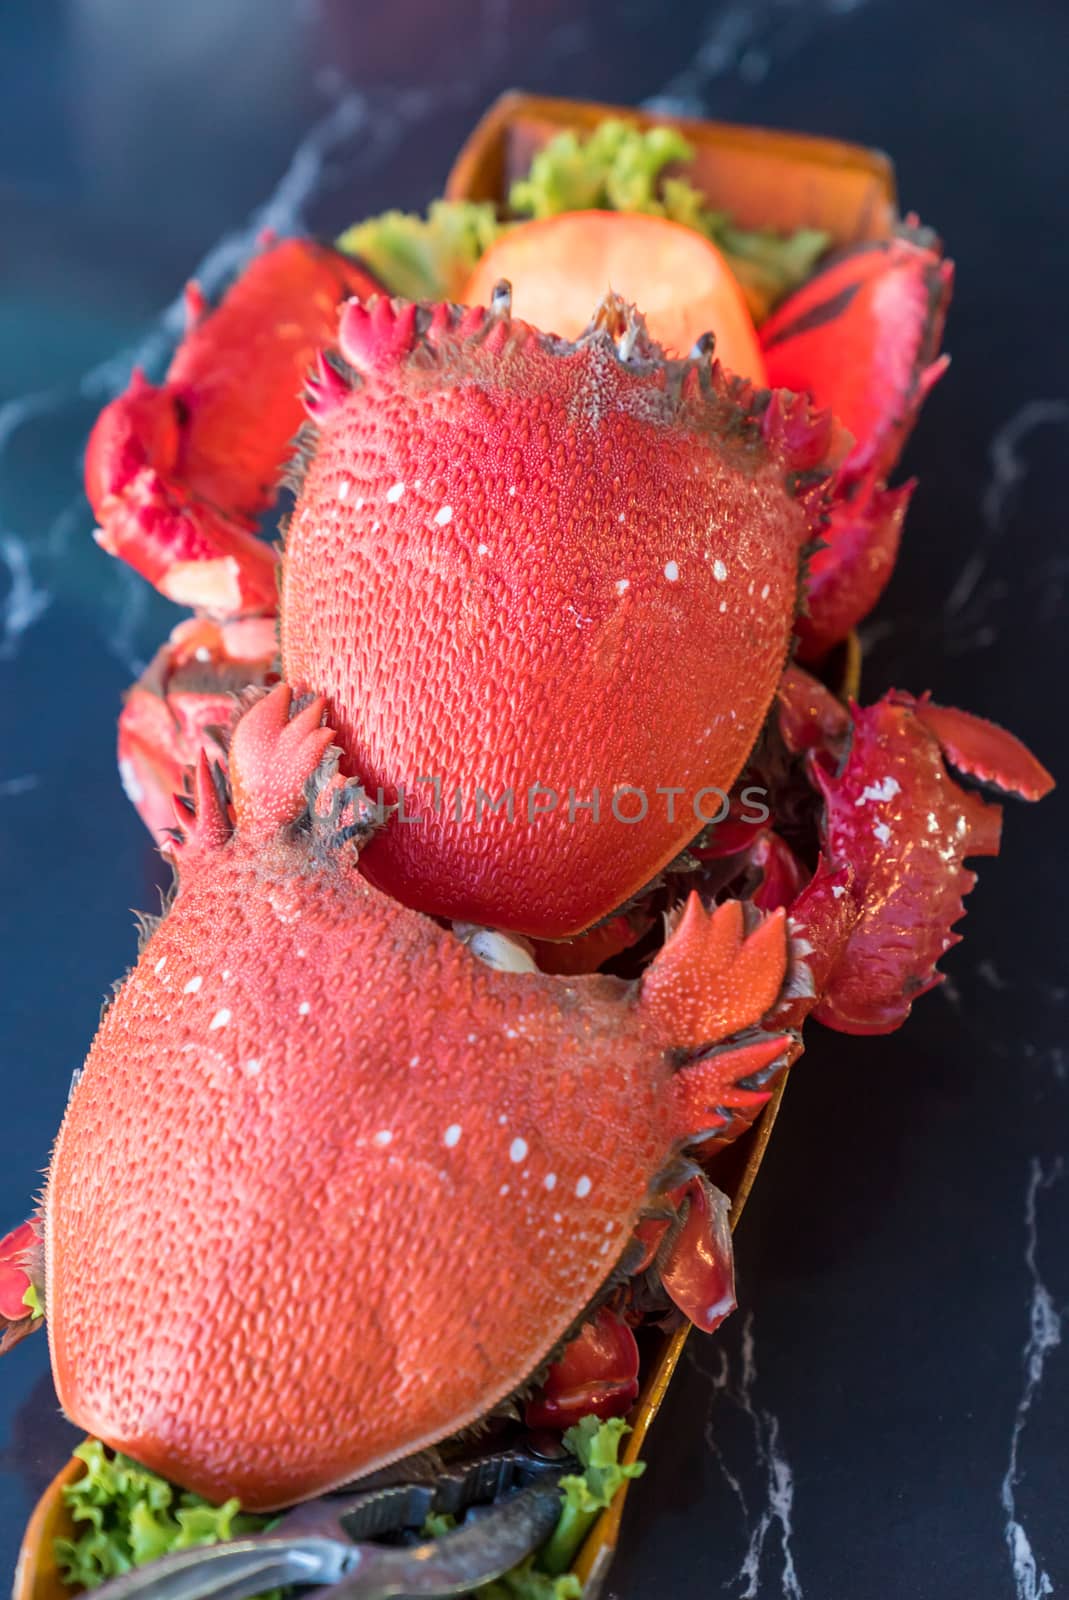 Red Frog Crab by vichie81